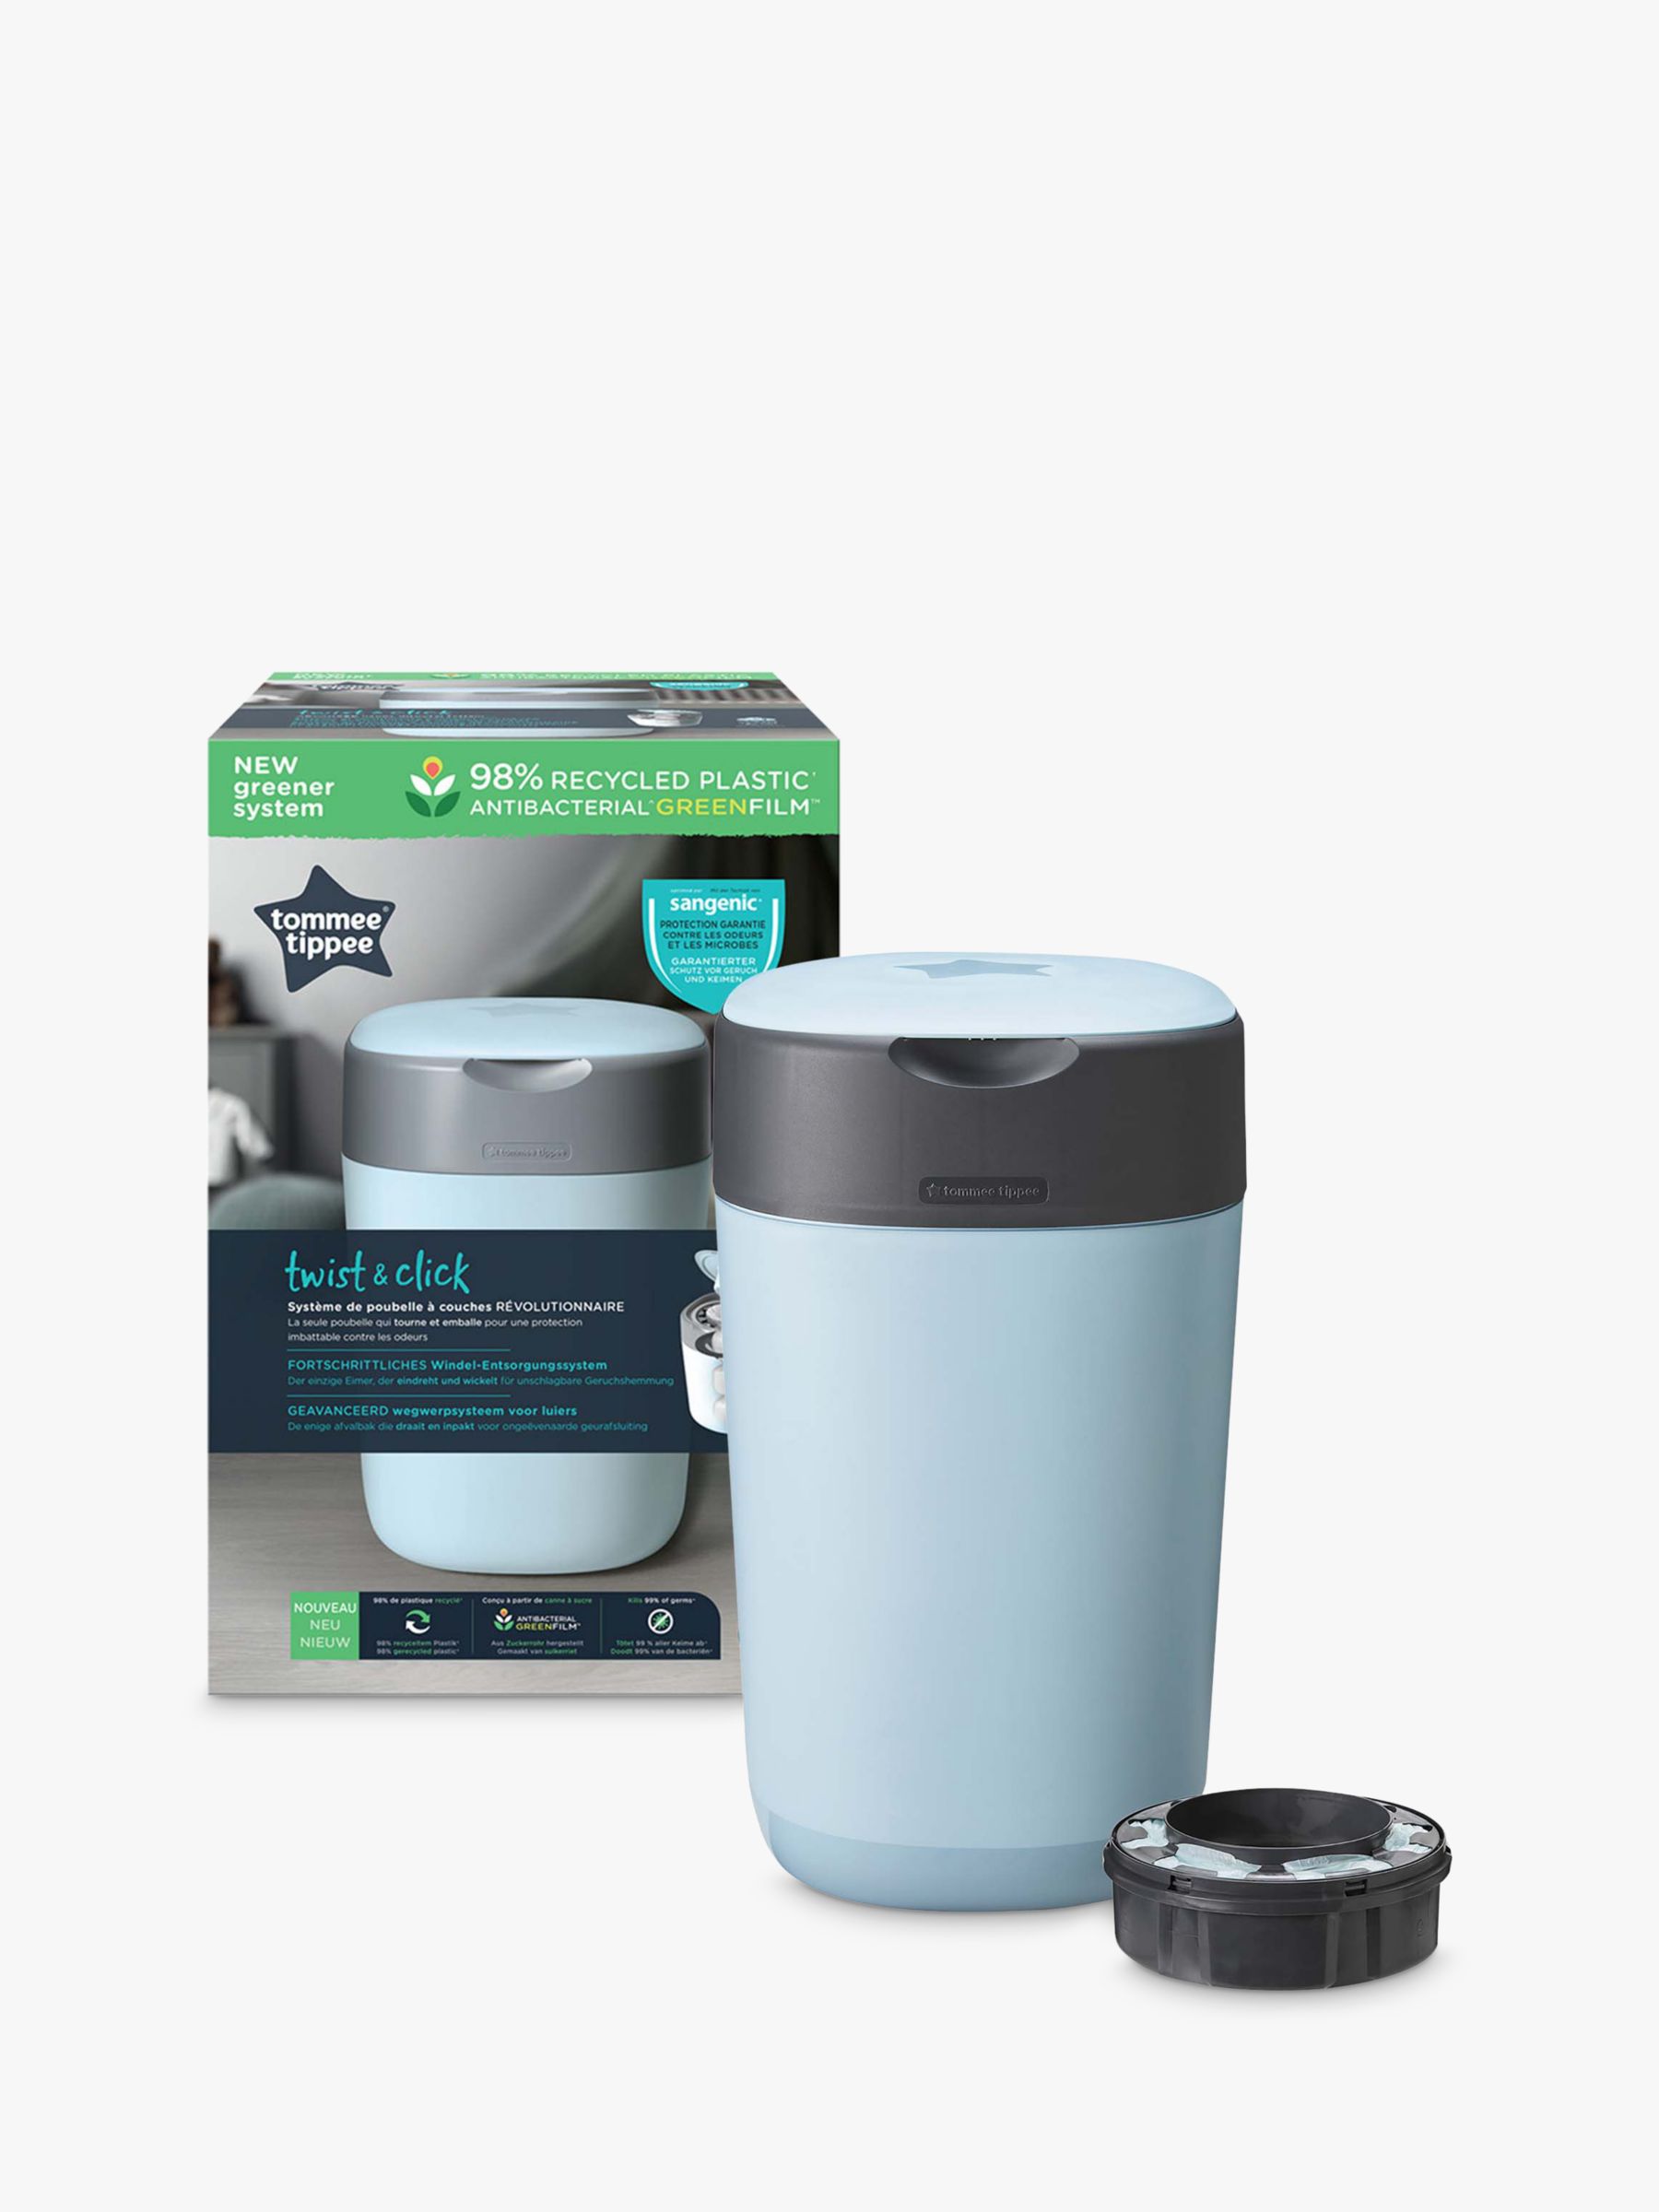 Buy Tommee Tippee Sangenic Nappy Disposal Bin Online at Low Prices in India  